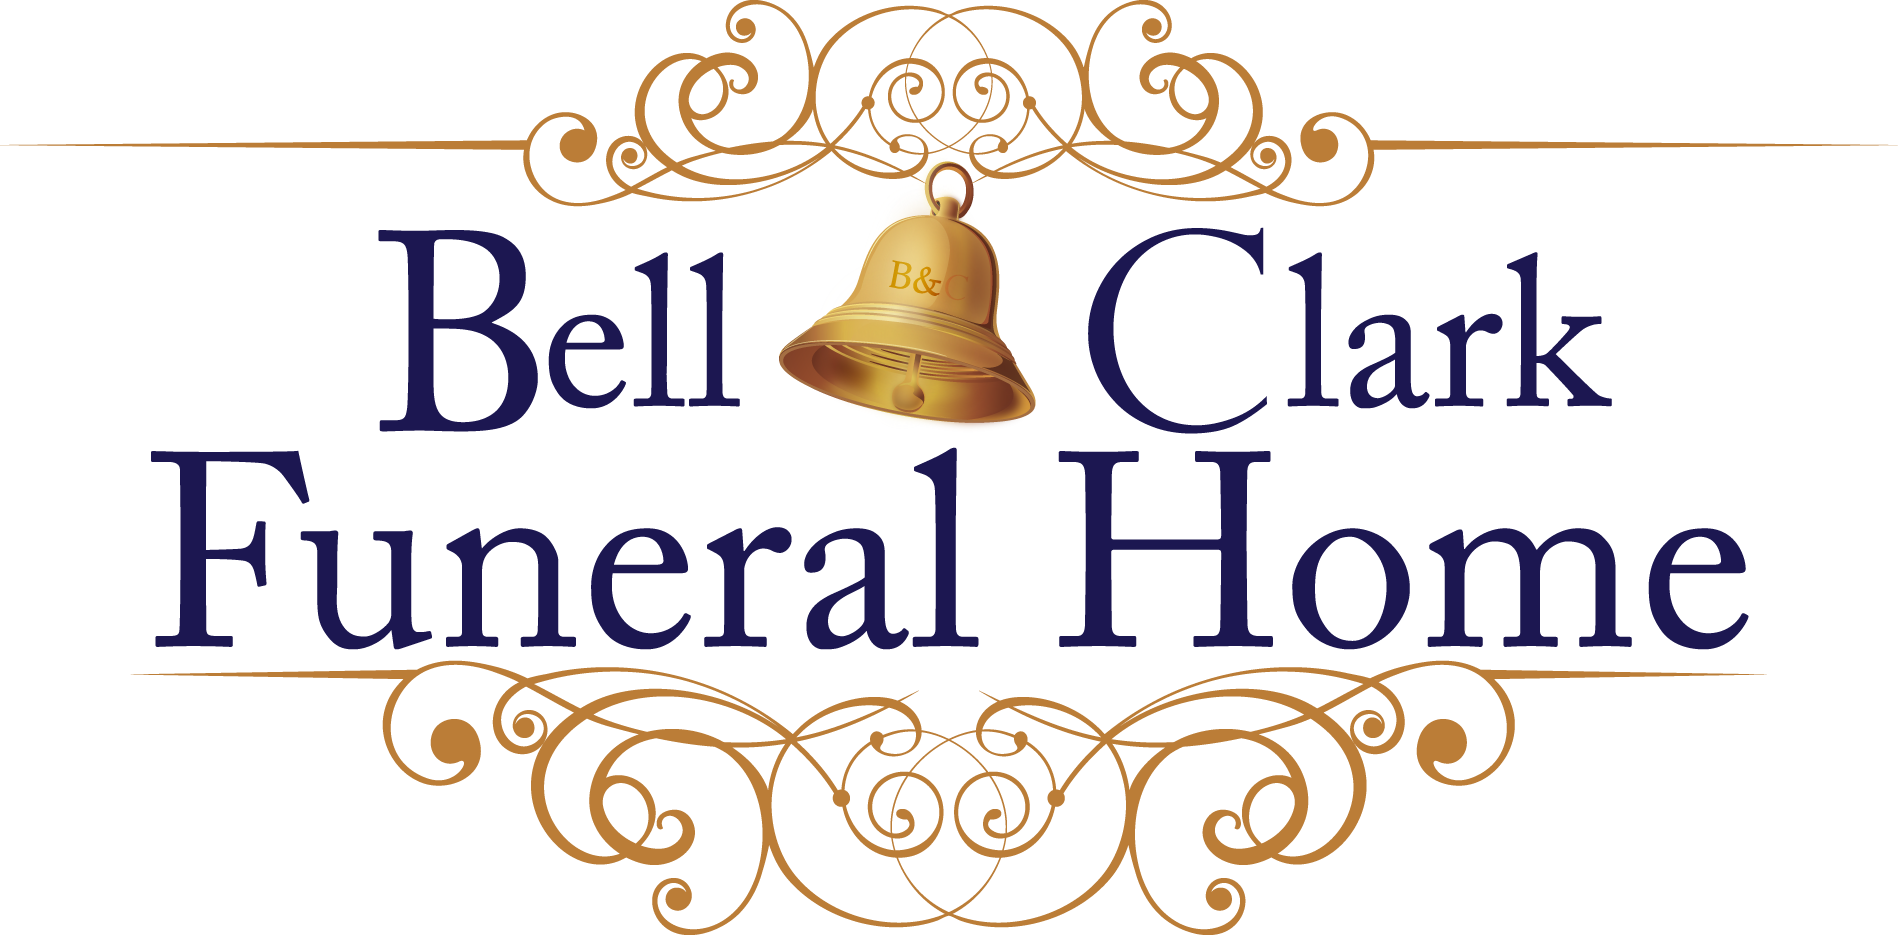 Bell & Clark Funeral Home Funeral home in Riviera Beach, FL